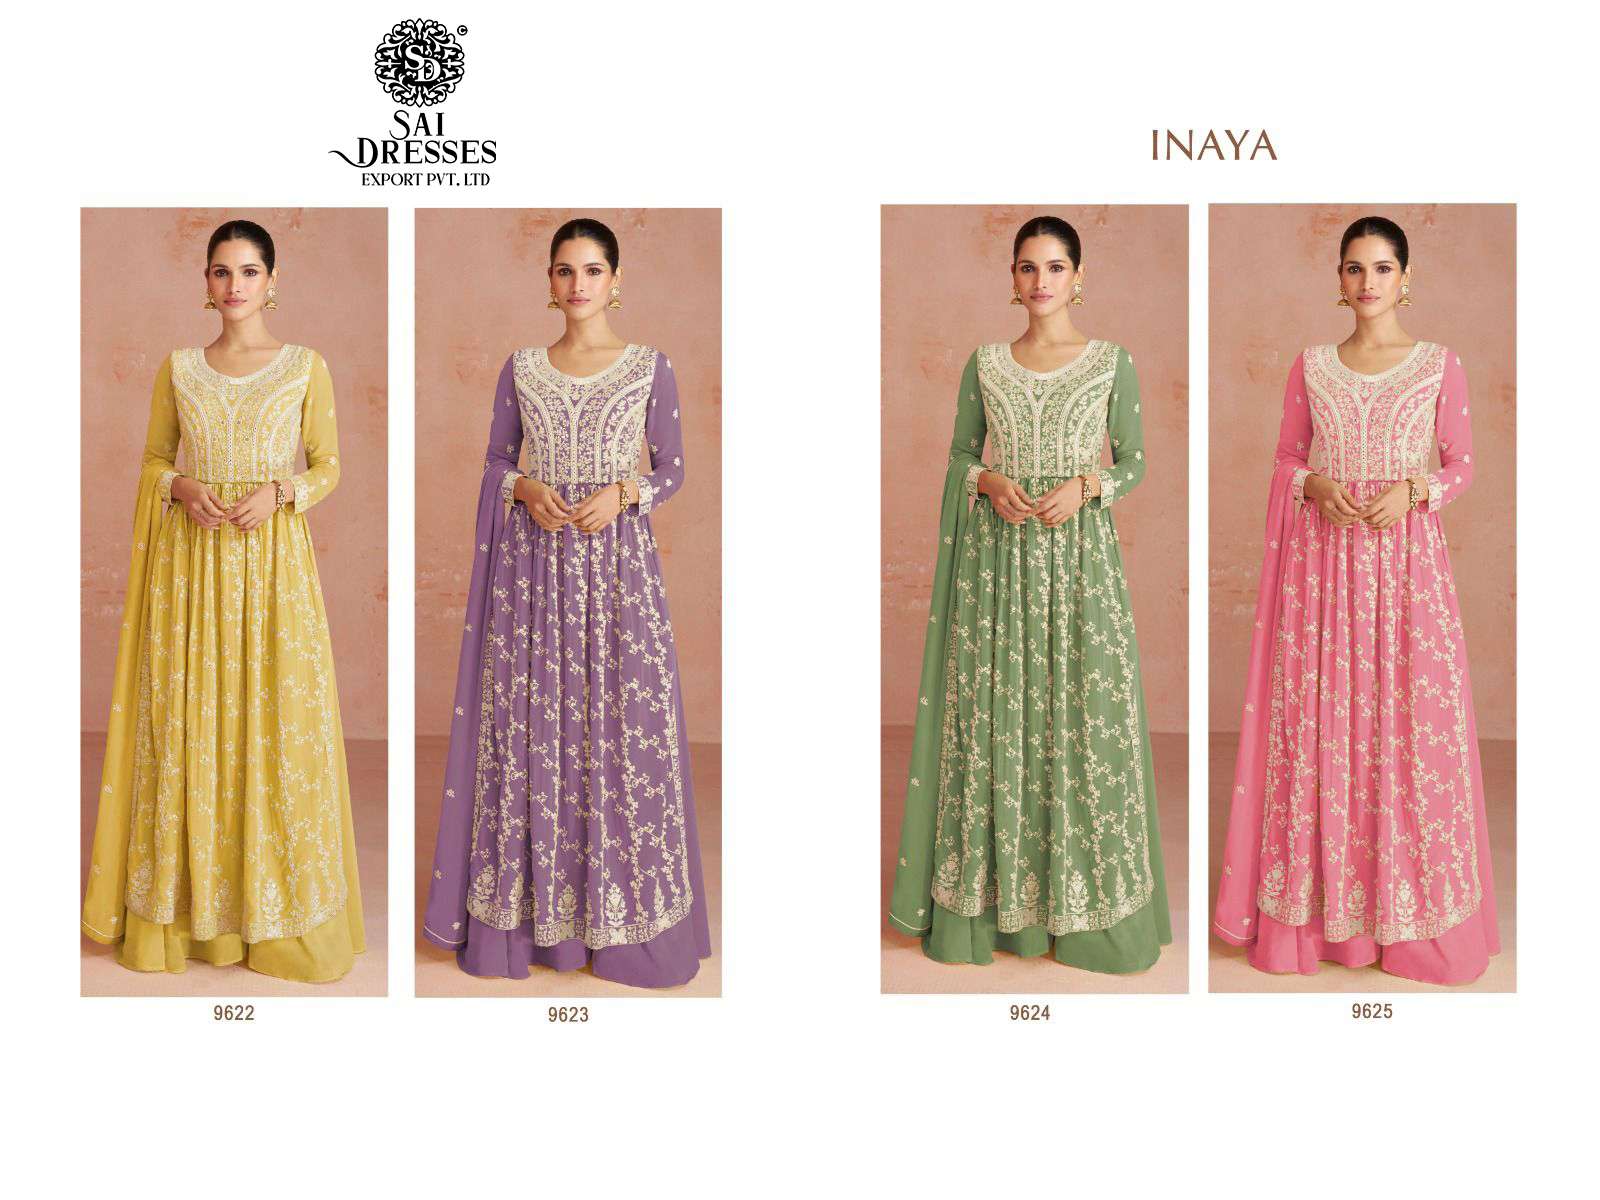 SAI DRESSES PRESENT INAYA READYMADE WEDDING WEAR NAYRA CUT PLAZZO STYLE DESIGNER SUITS IN WHOLESALE RATE IN SURAT